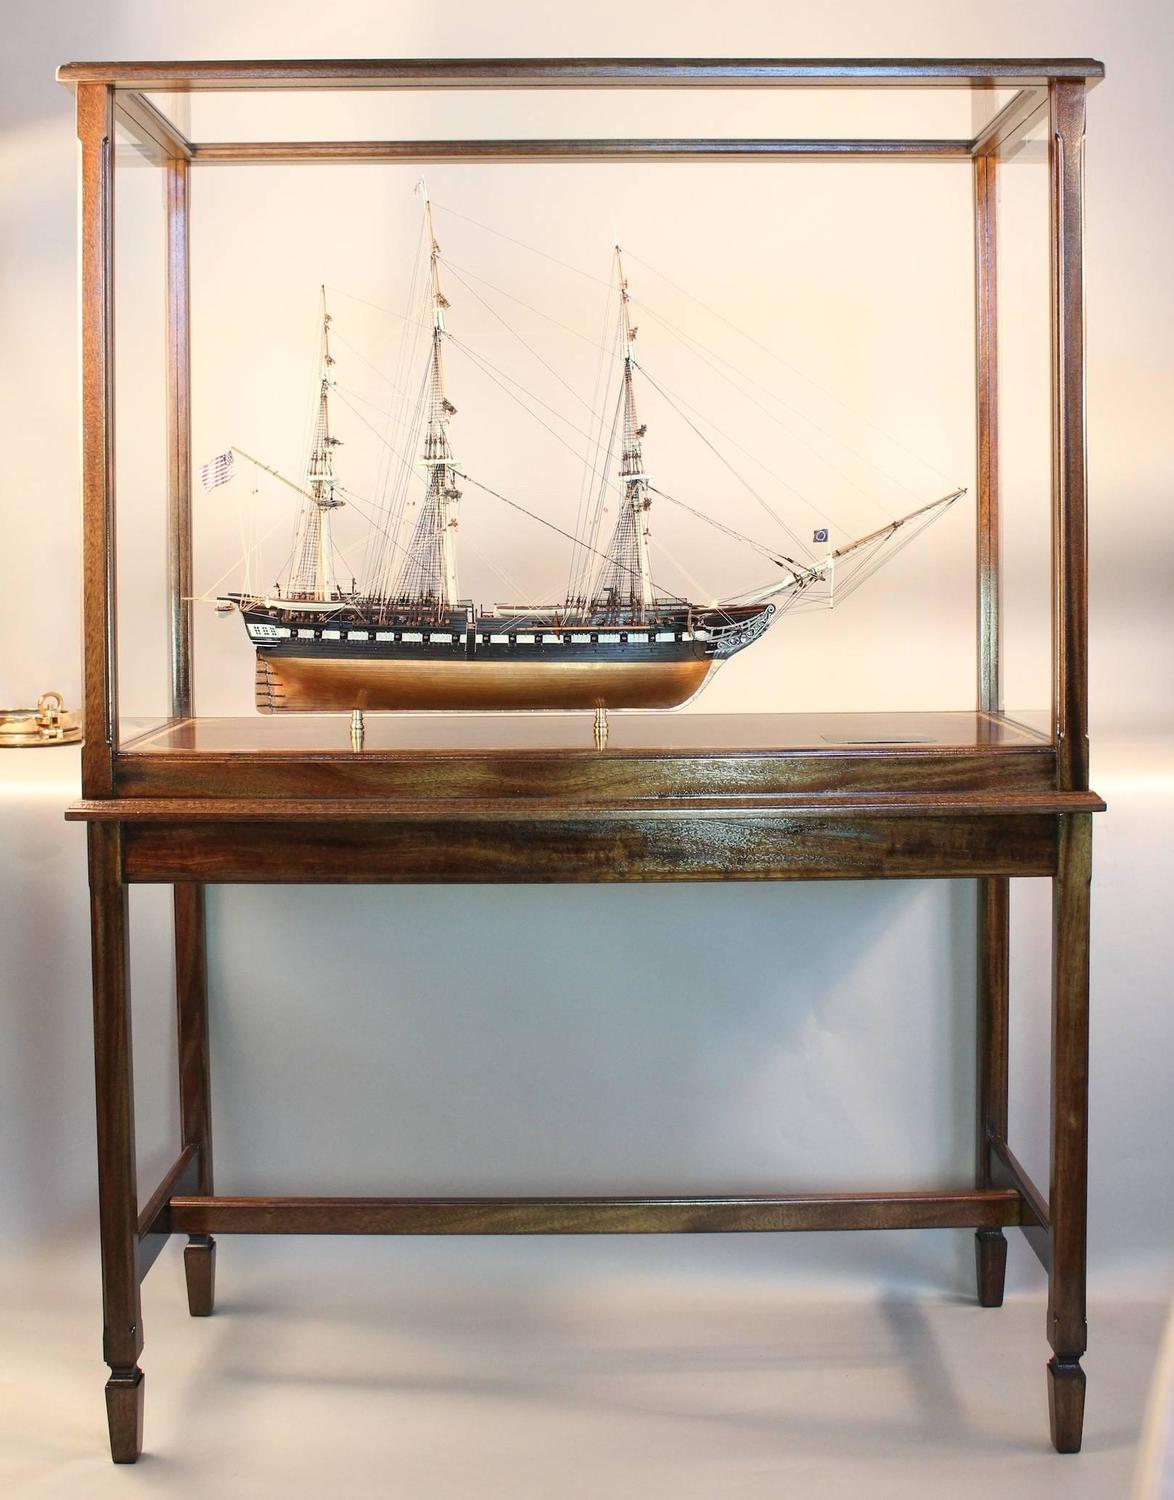 Uss Constitution Old Ironsides Ship Model In Display Case For Sale At